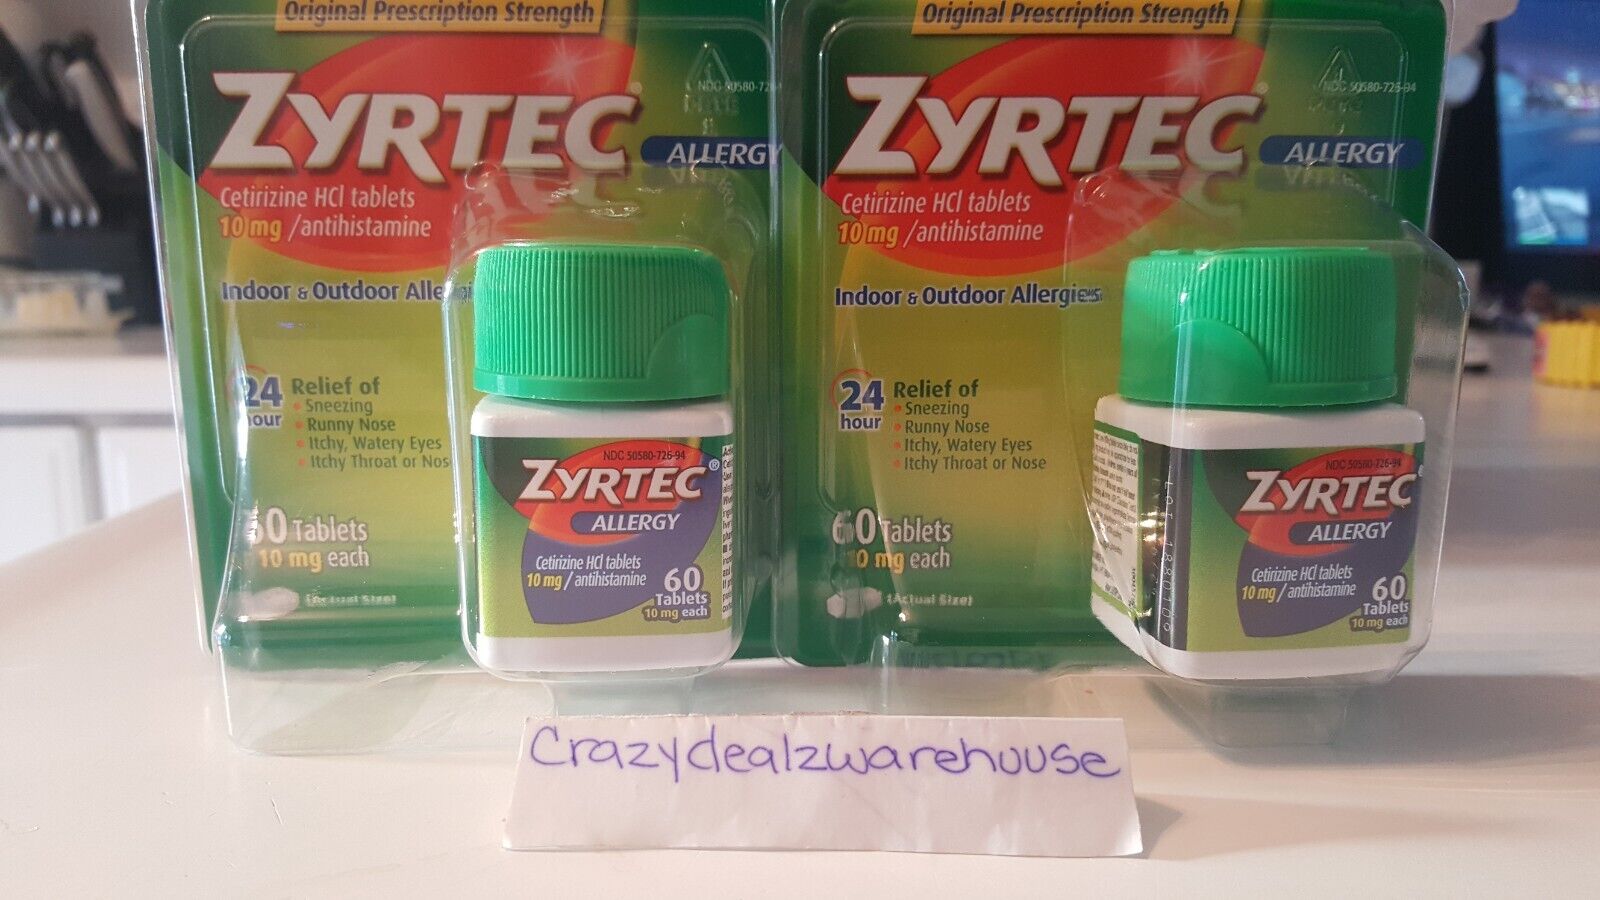 ~2 Pack~Zyrtec ~ 24 Hour Allergy Relief  60 Tablets x 2 Packs~120 Tablets Total Zyrtec n/a